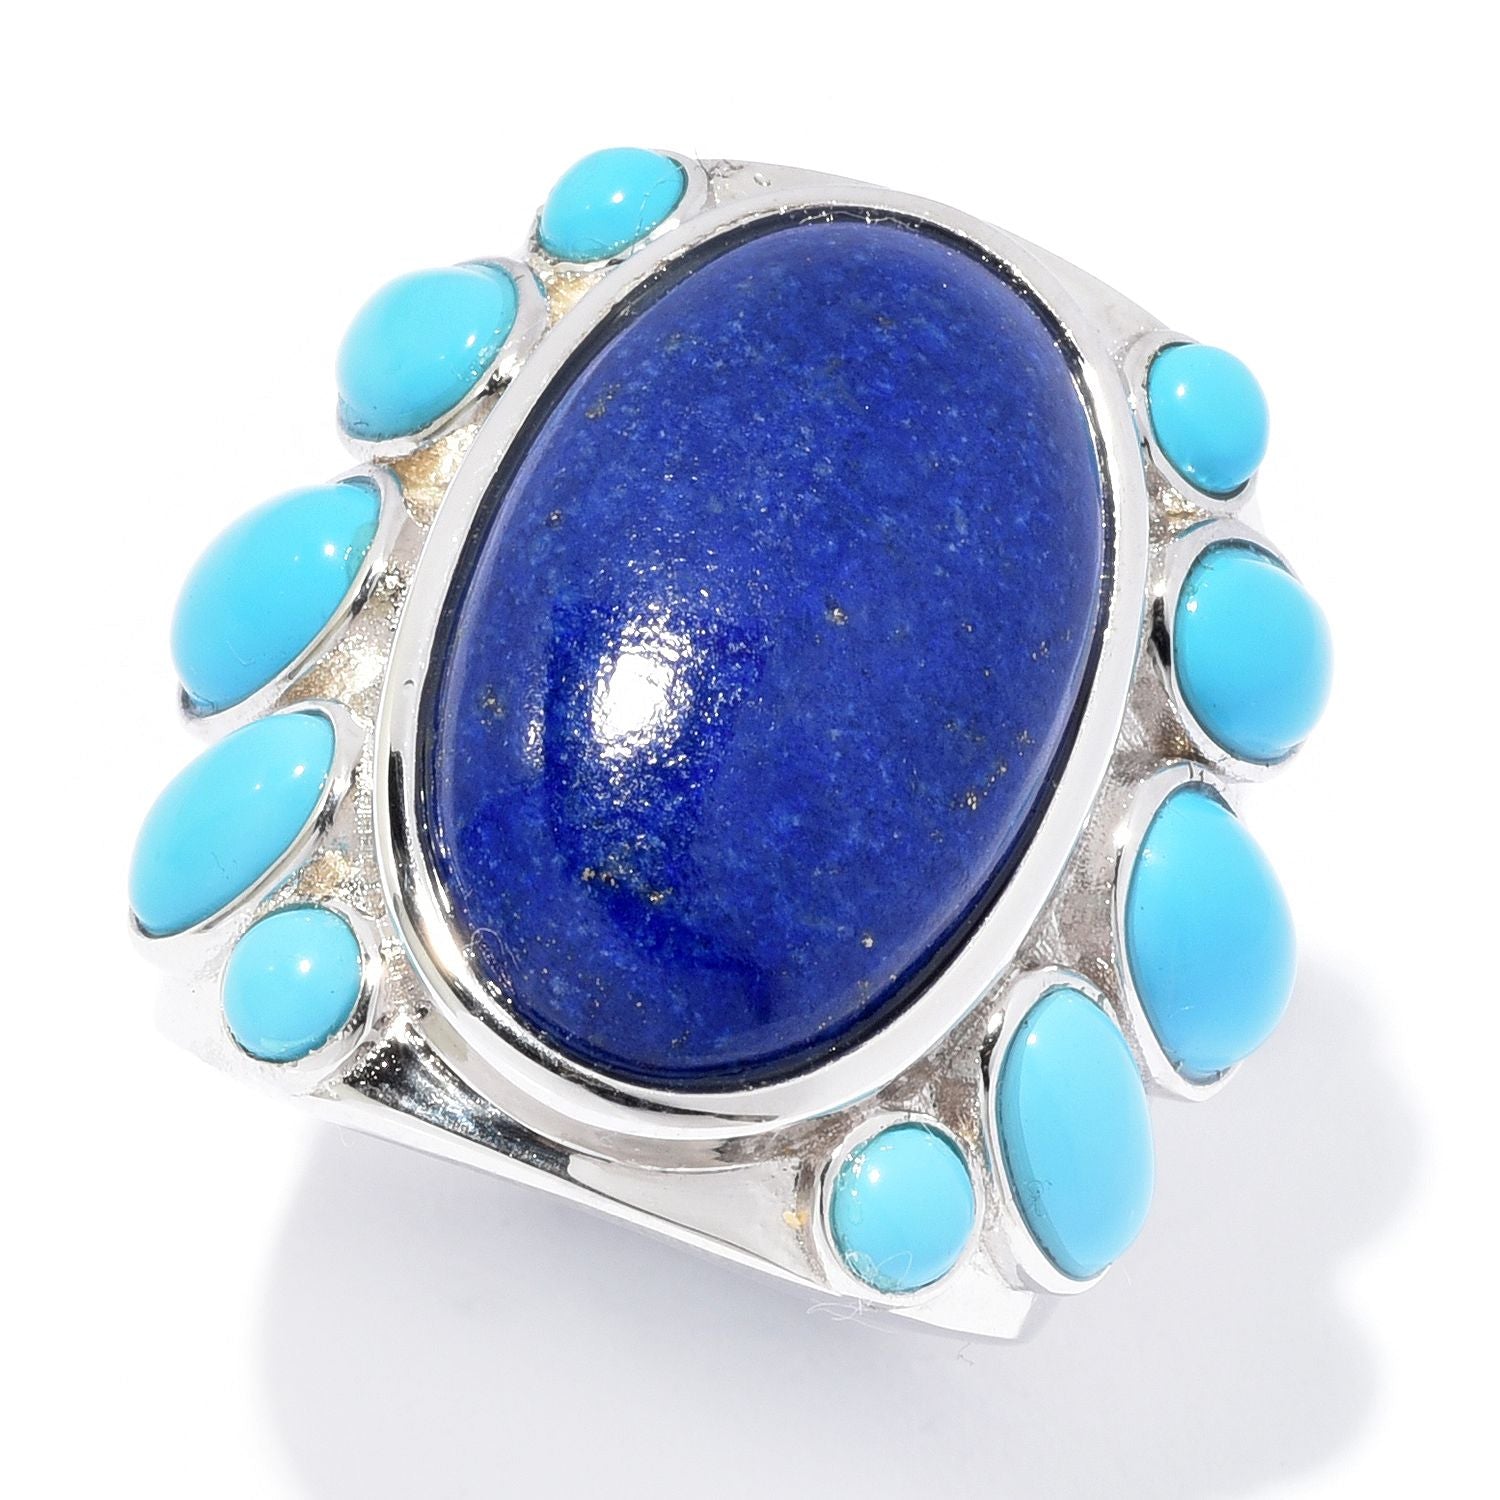 Pinctore 20 x 12mm Oval Shaped Lapis & Sonora Beauty Turquoise Ring - pinctore